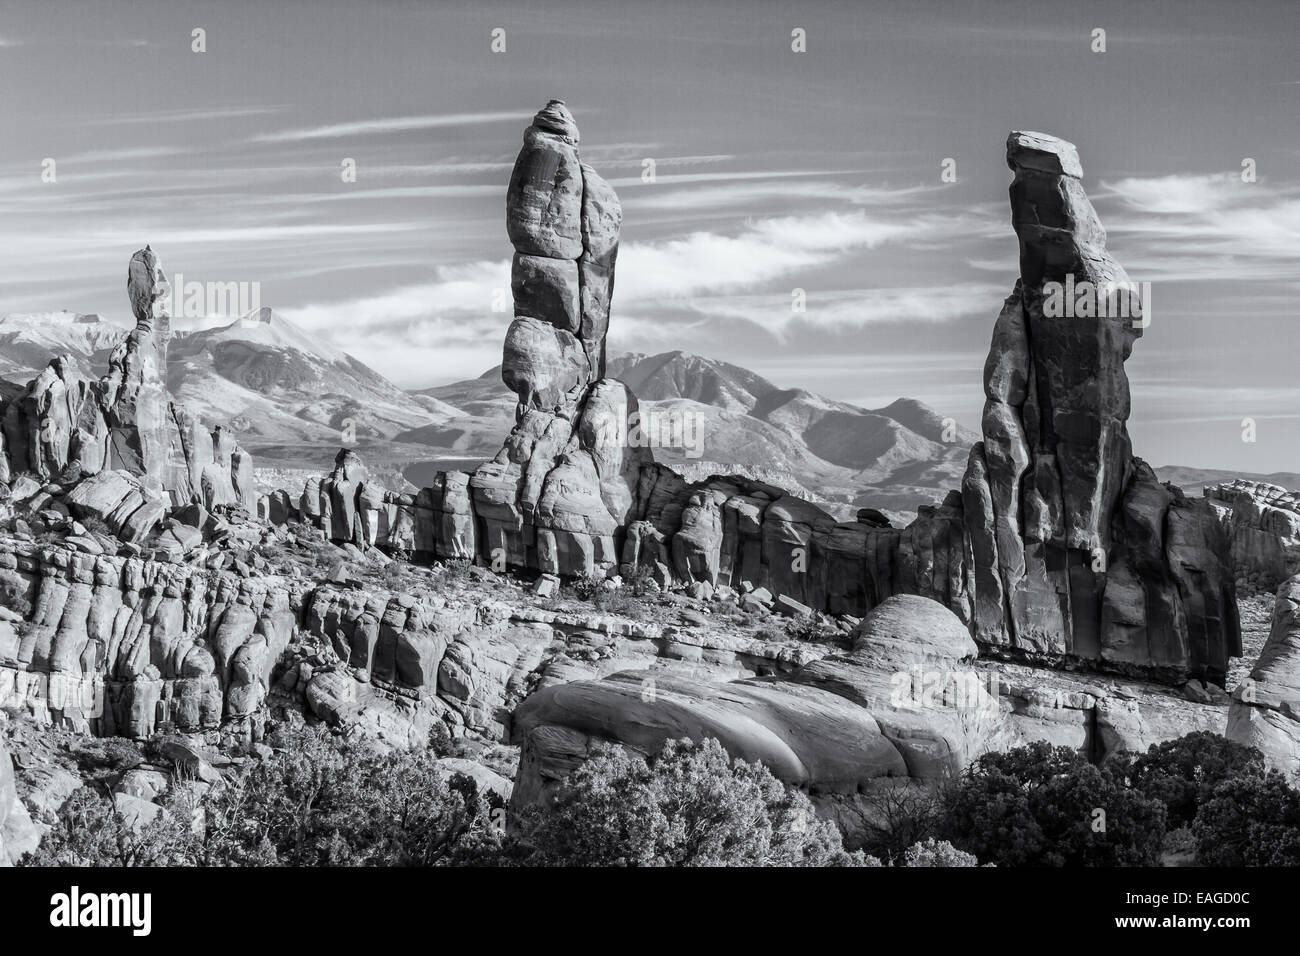 Black and white photo of four 'Marching Men' sandstone pillars in front of the La Sal Mountains in the Klondike Bluffs area of A Stock Photo